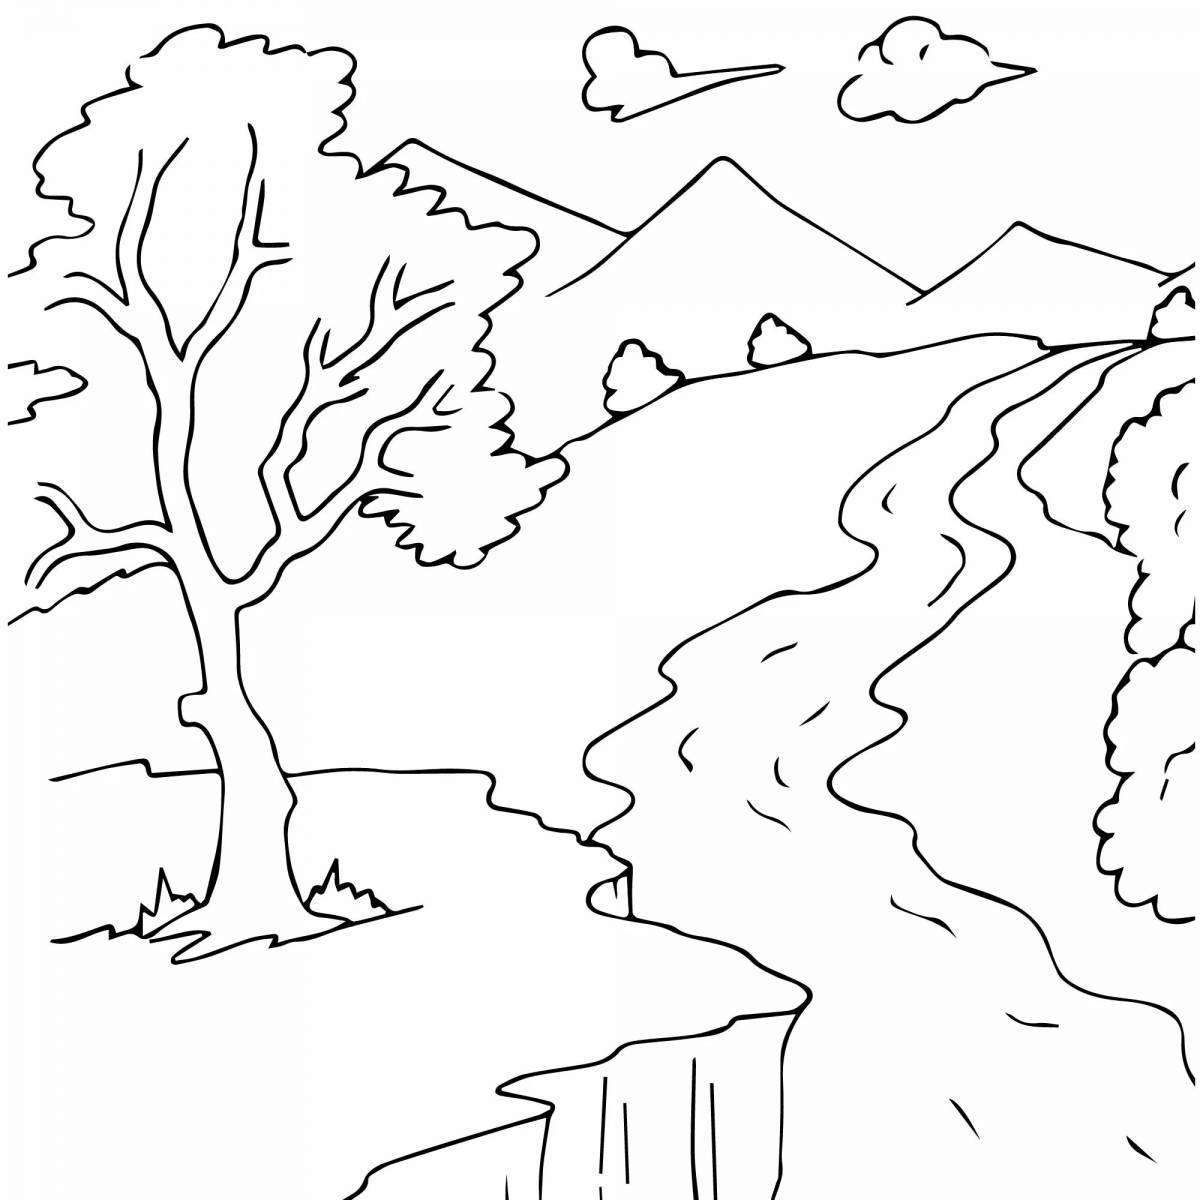 Shiny river coloring pages for kids